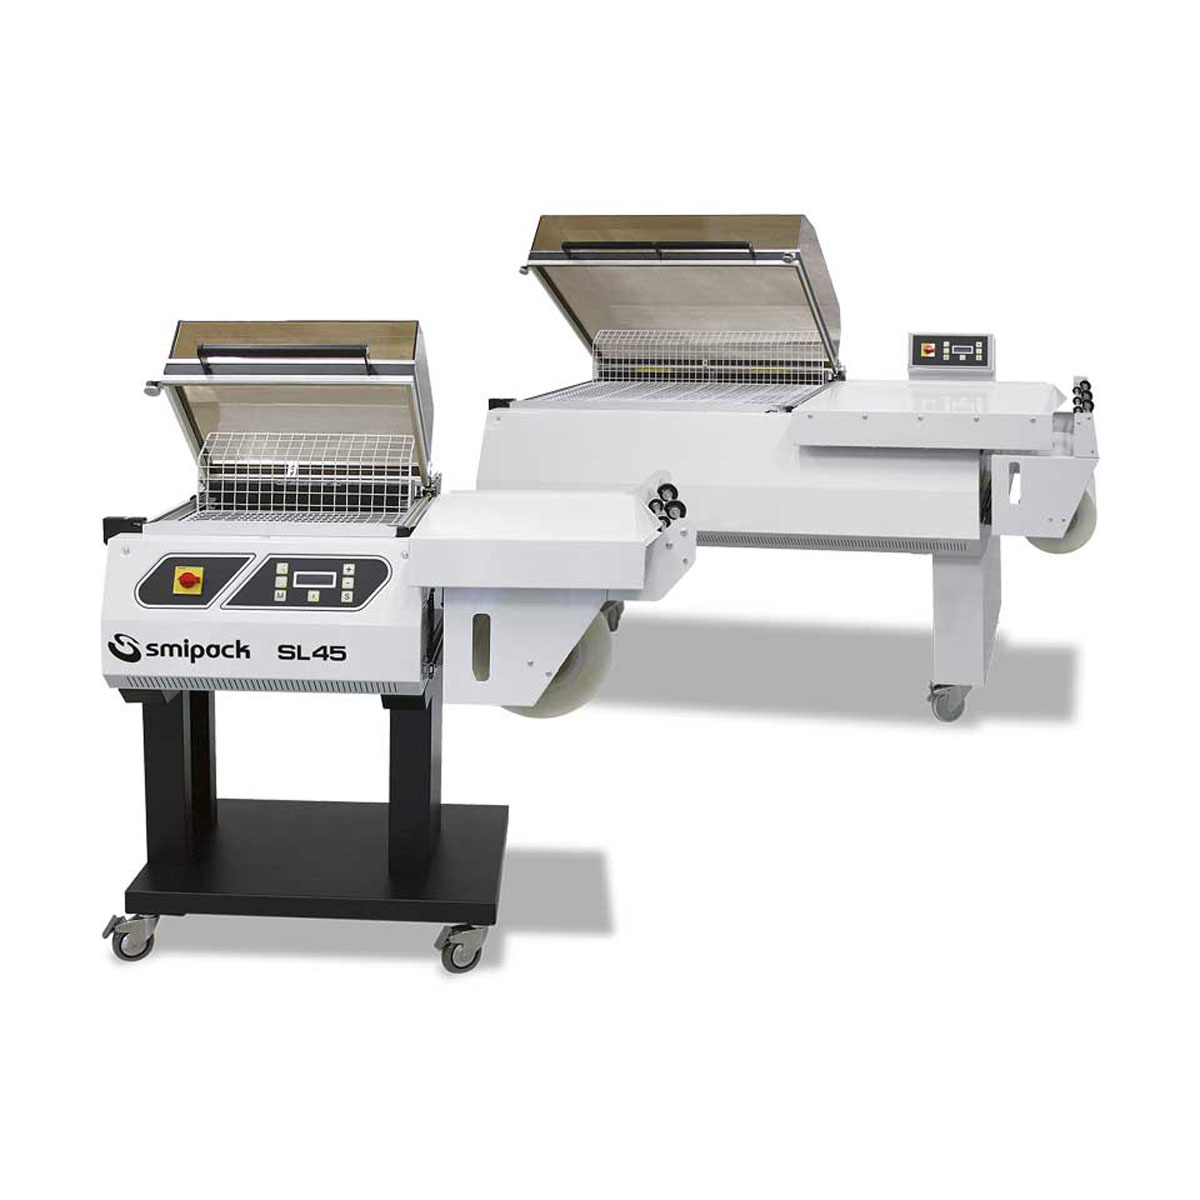 Buy Hood Shrink Wrap Machine in Hood Shrink Wrappers from Smipack available at Astrolift NZ